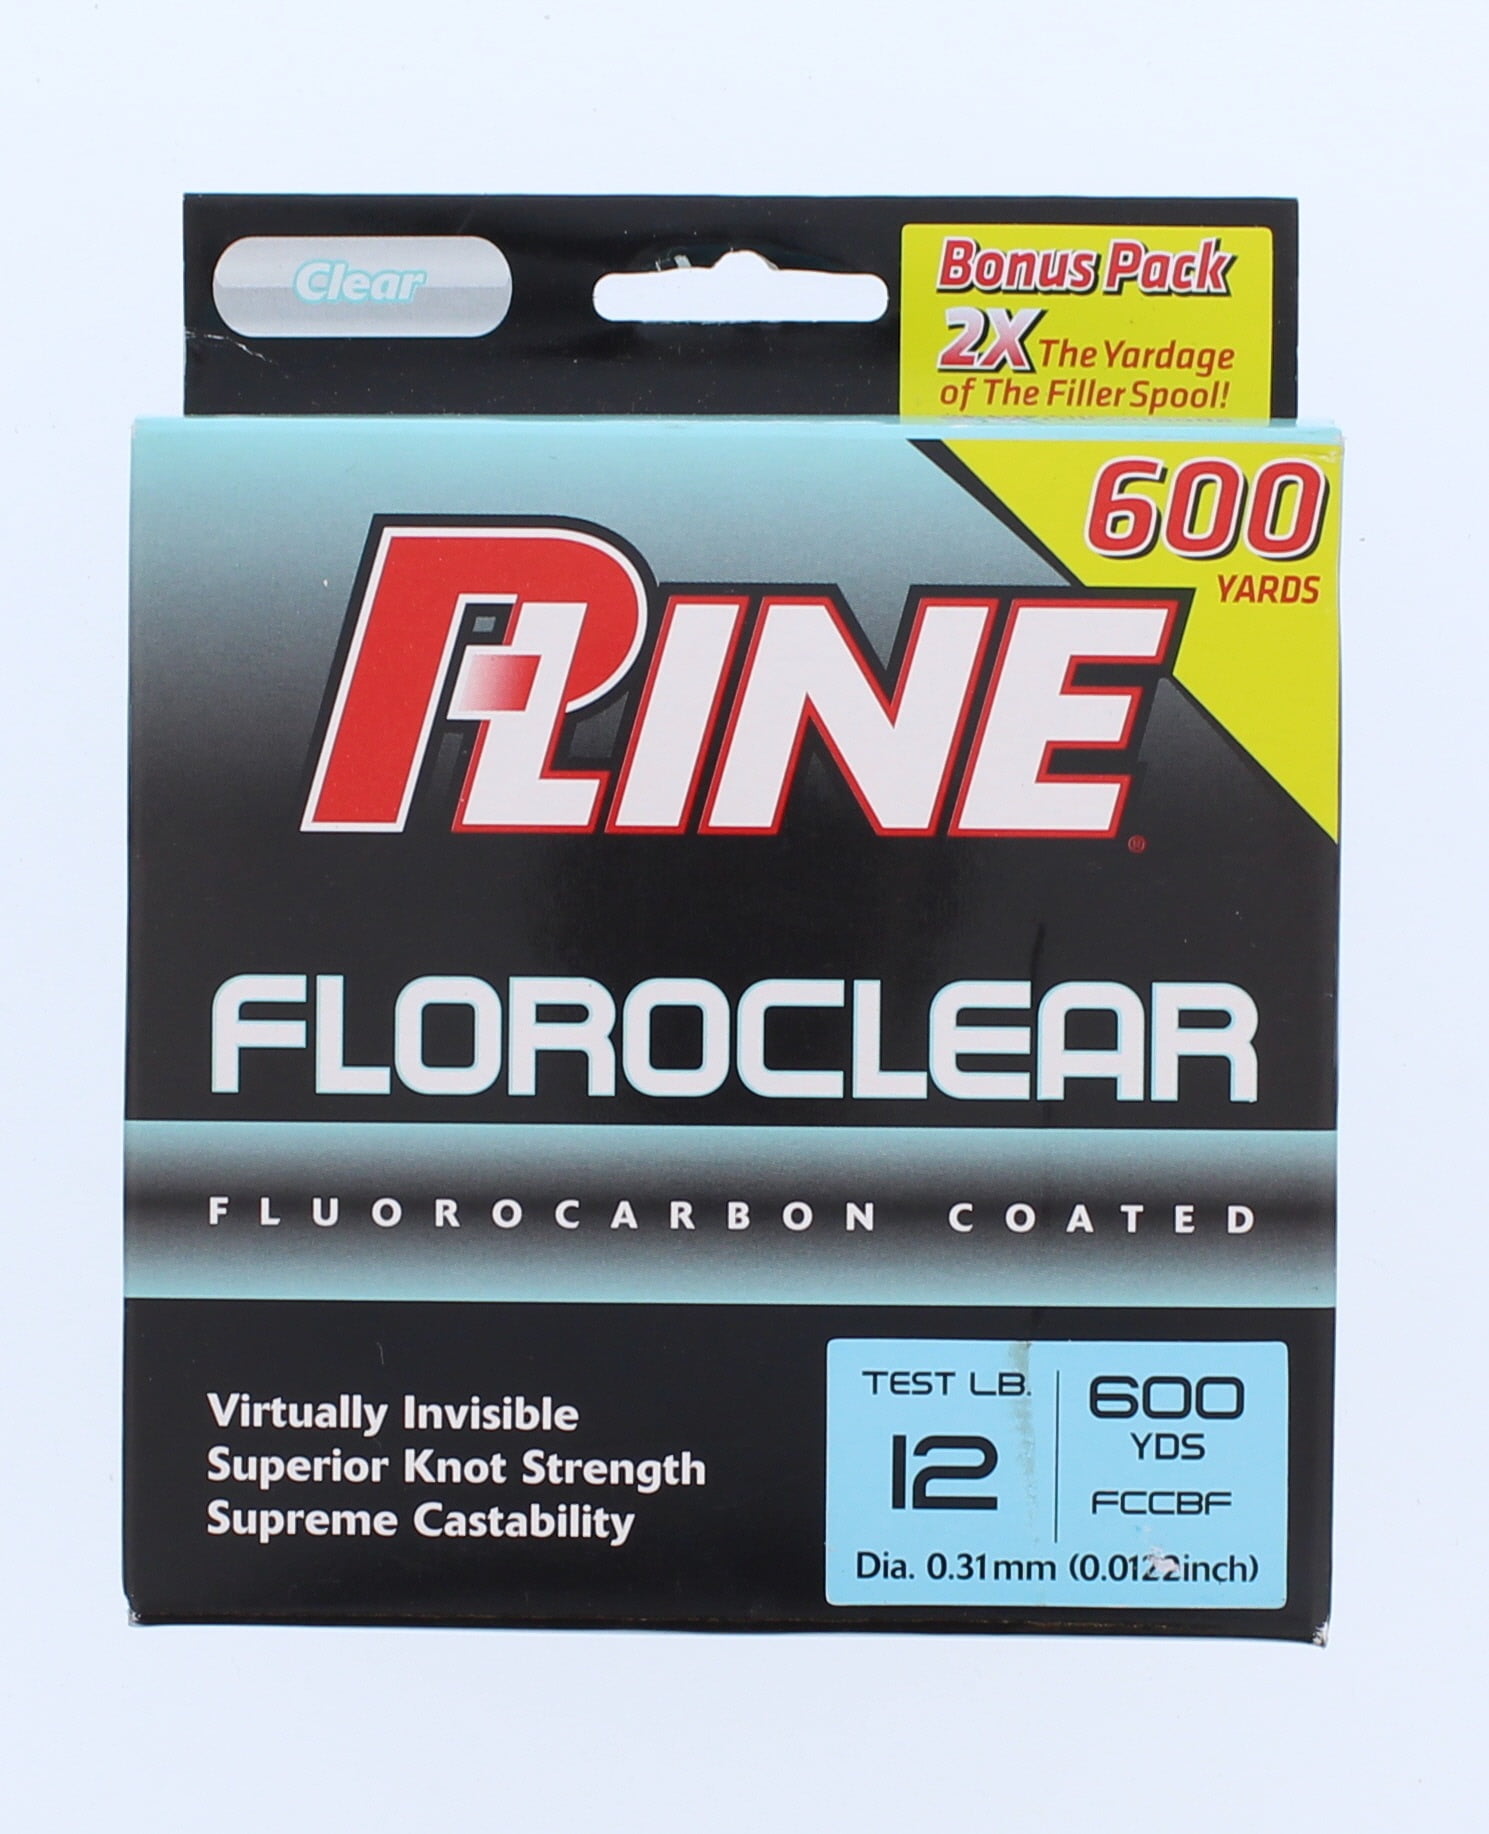 P-Line Floroclear Fluorocarbon Coated Fishing Line (12 Lb./ 600